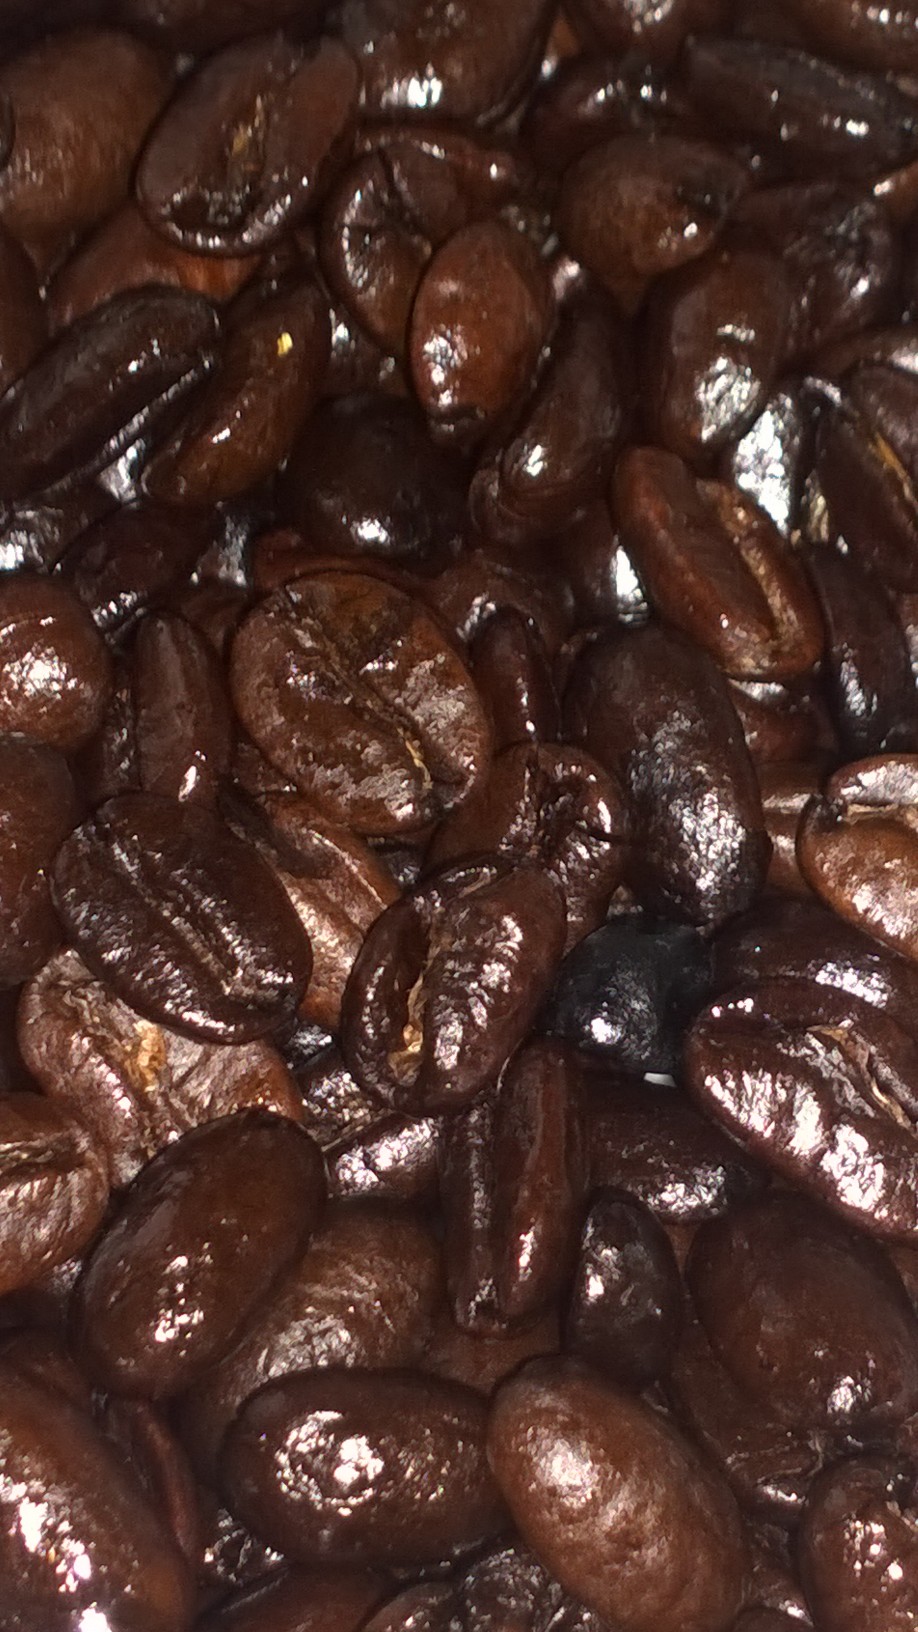 Roasted Coffee Beans Laos 5 Pounds